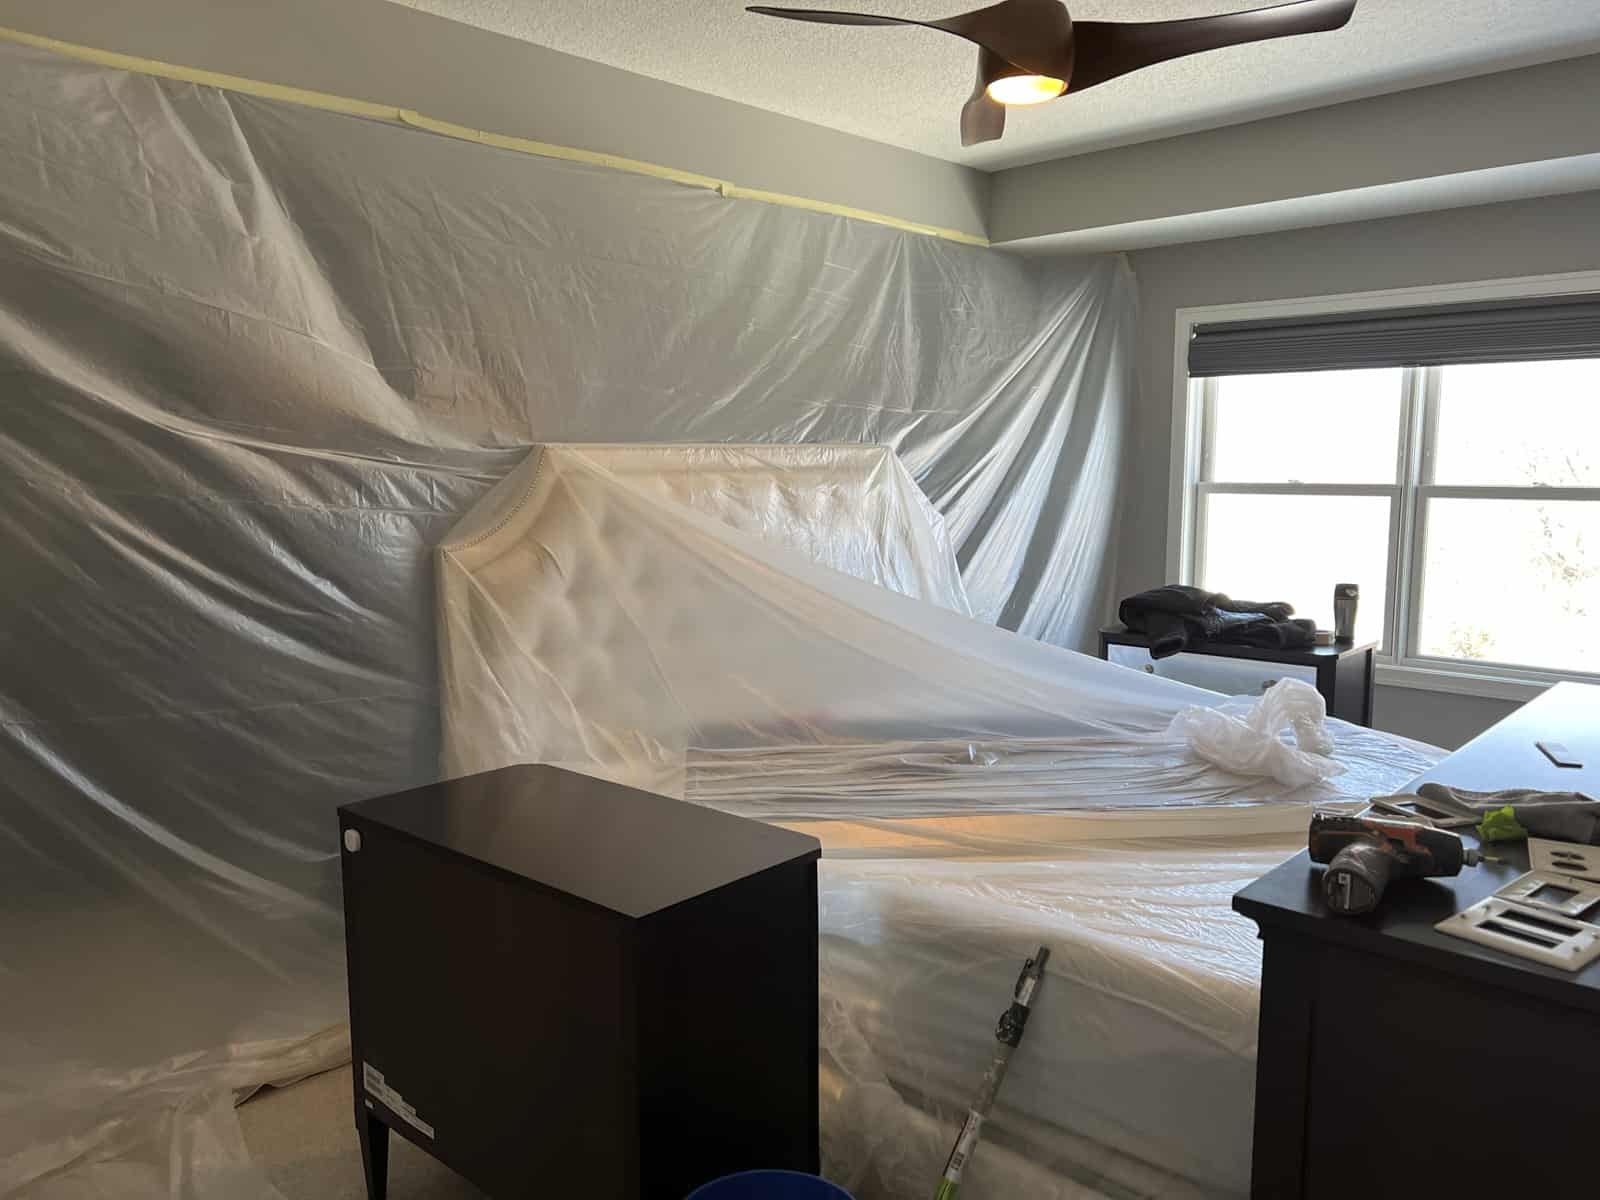 A bedroom covered with plastic before painting. 